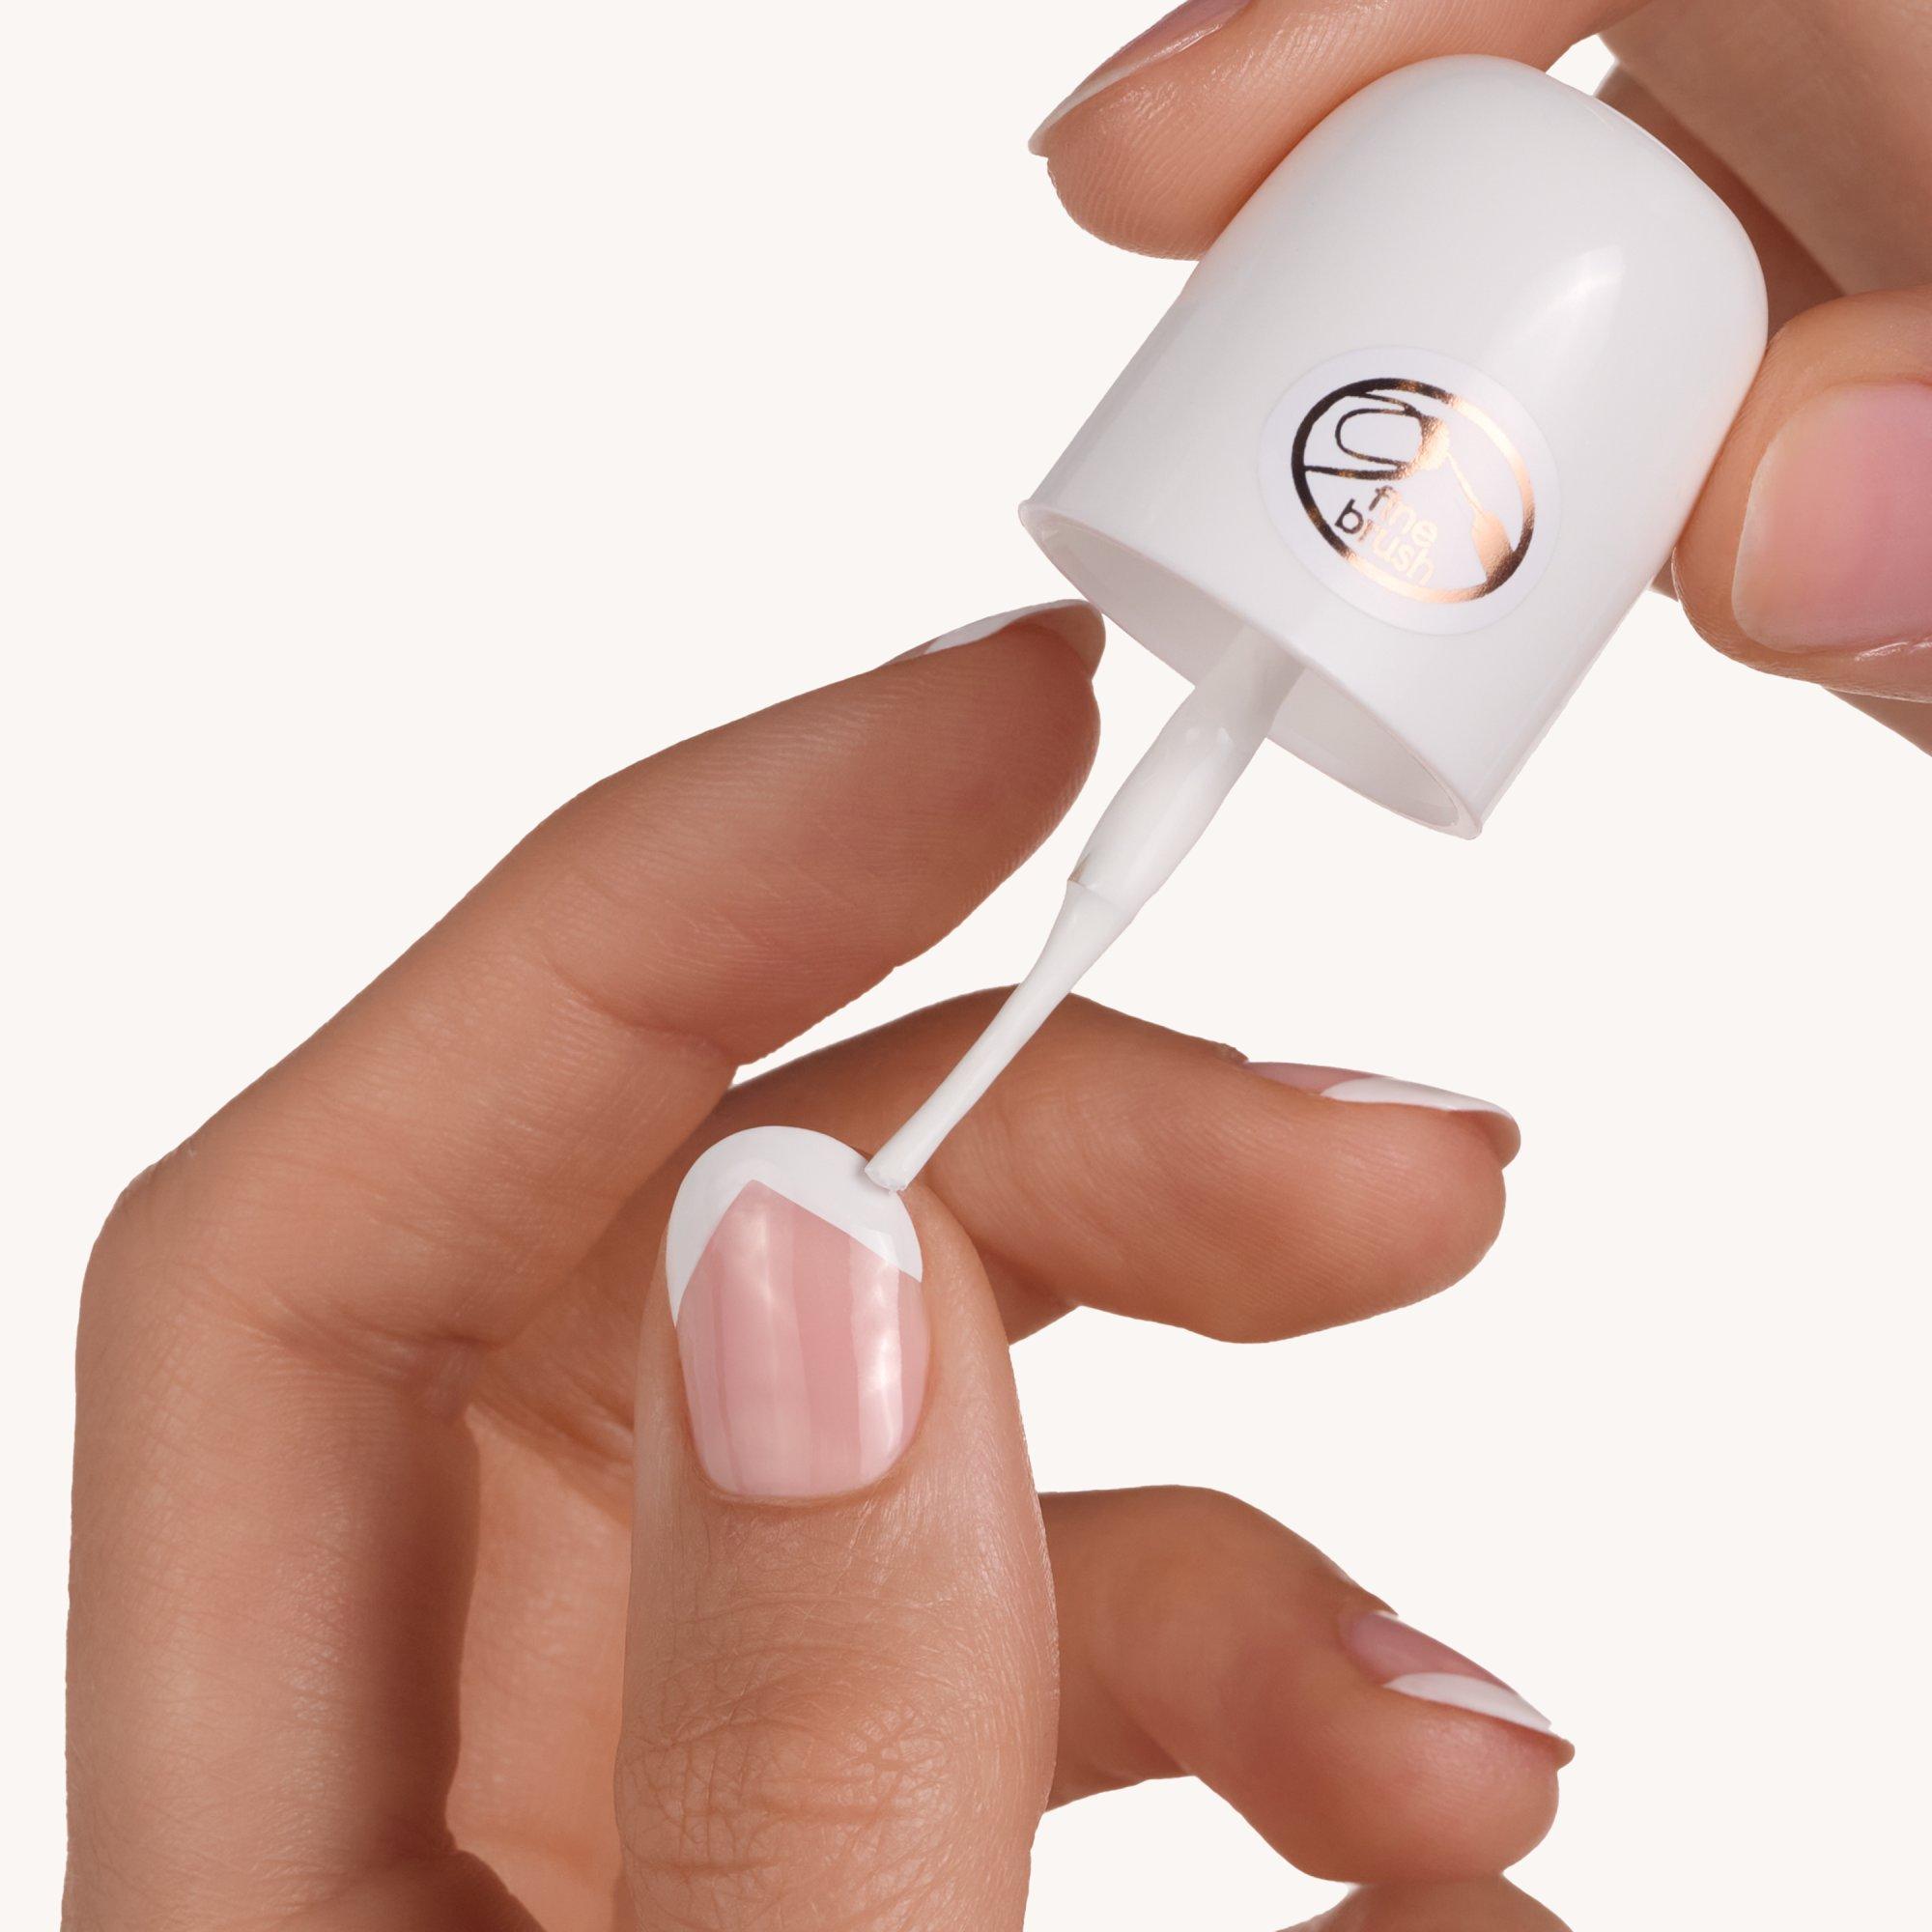 french MANICURE tip painter